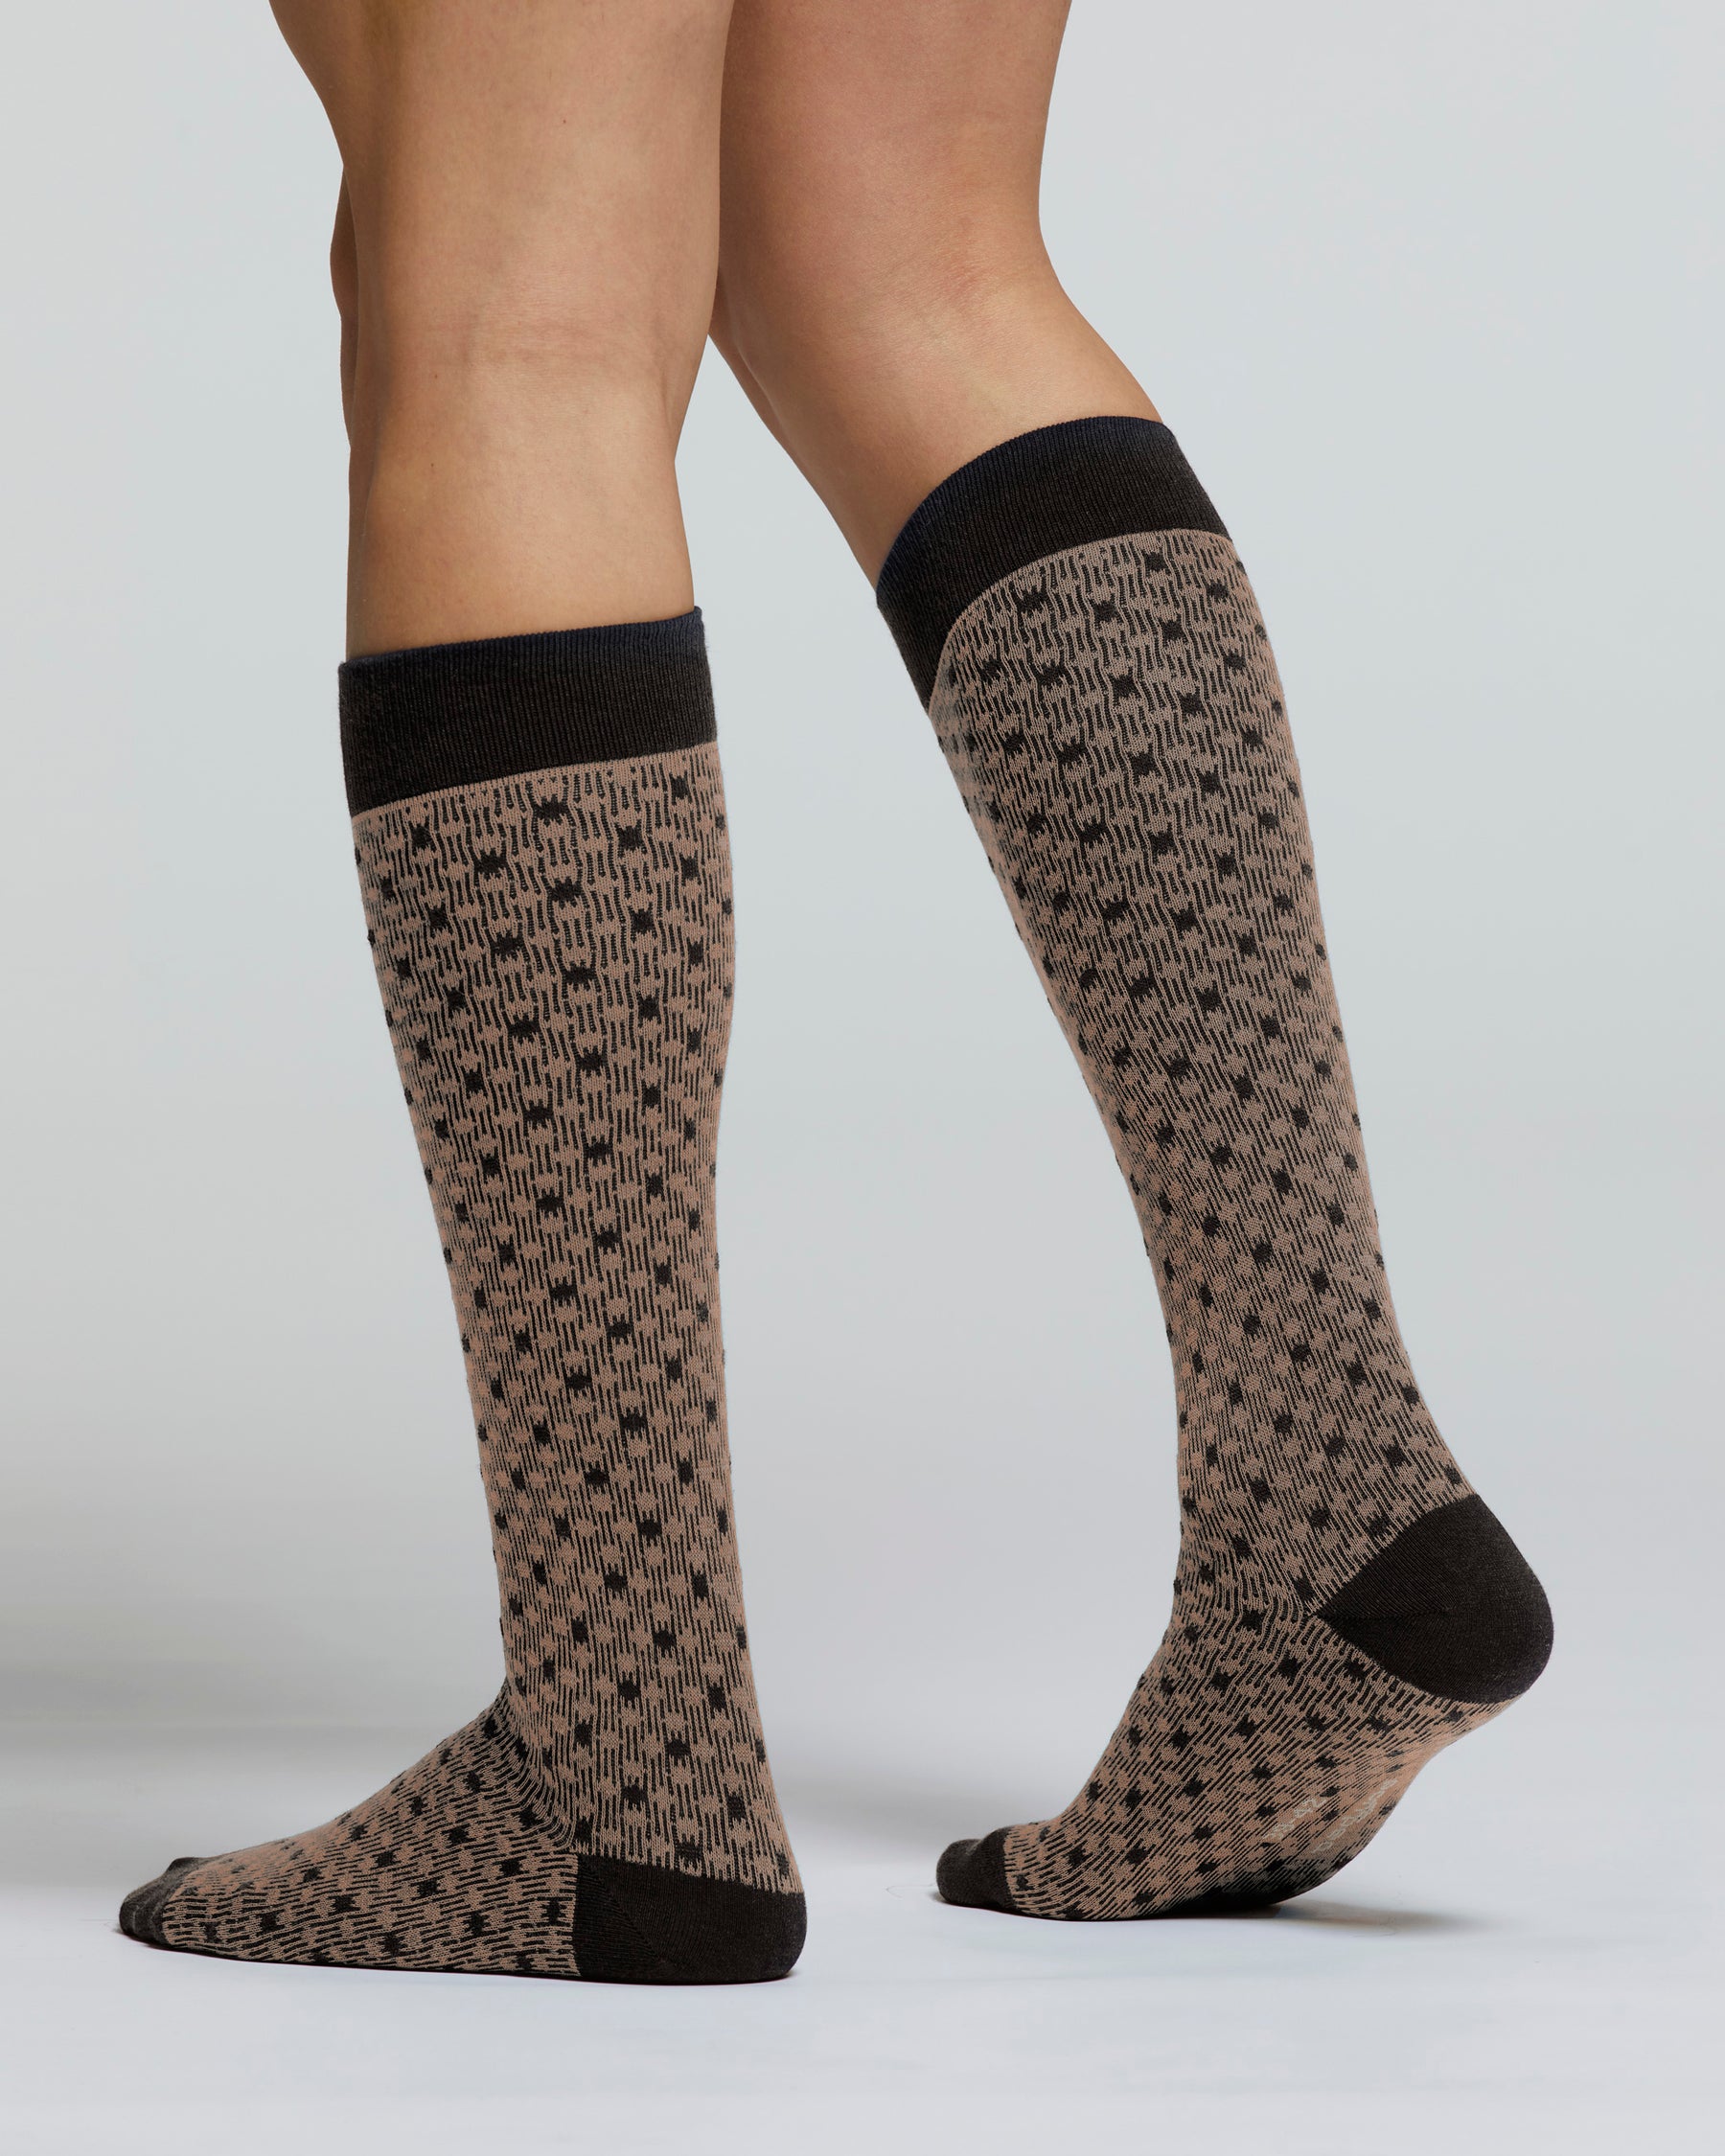 CHAUSSETTES LONGUES COING COING MOTIF NŒUD